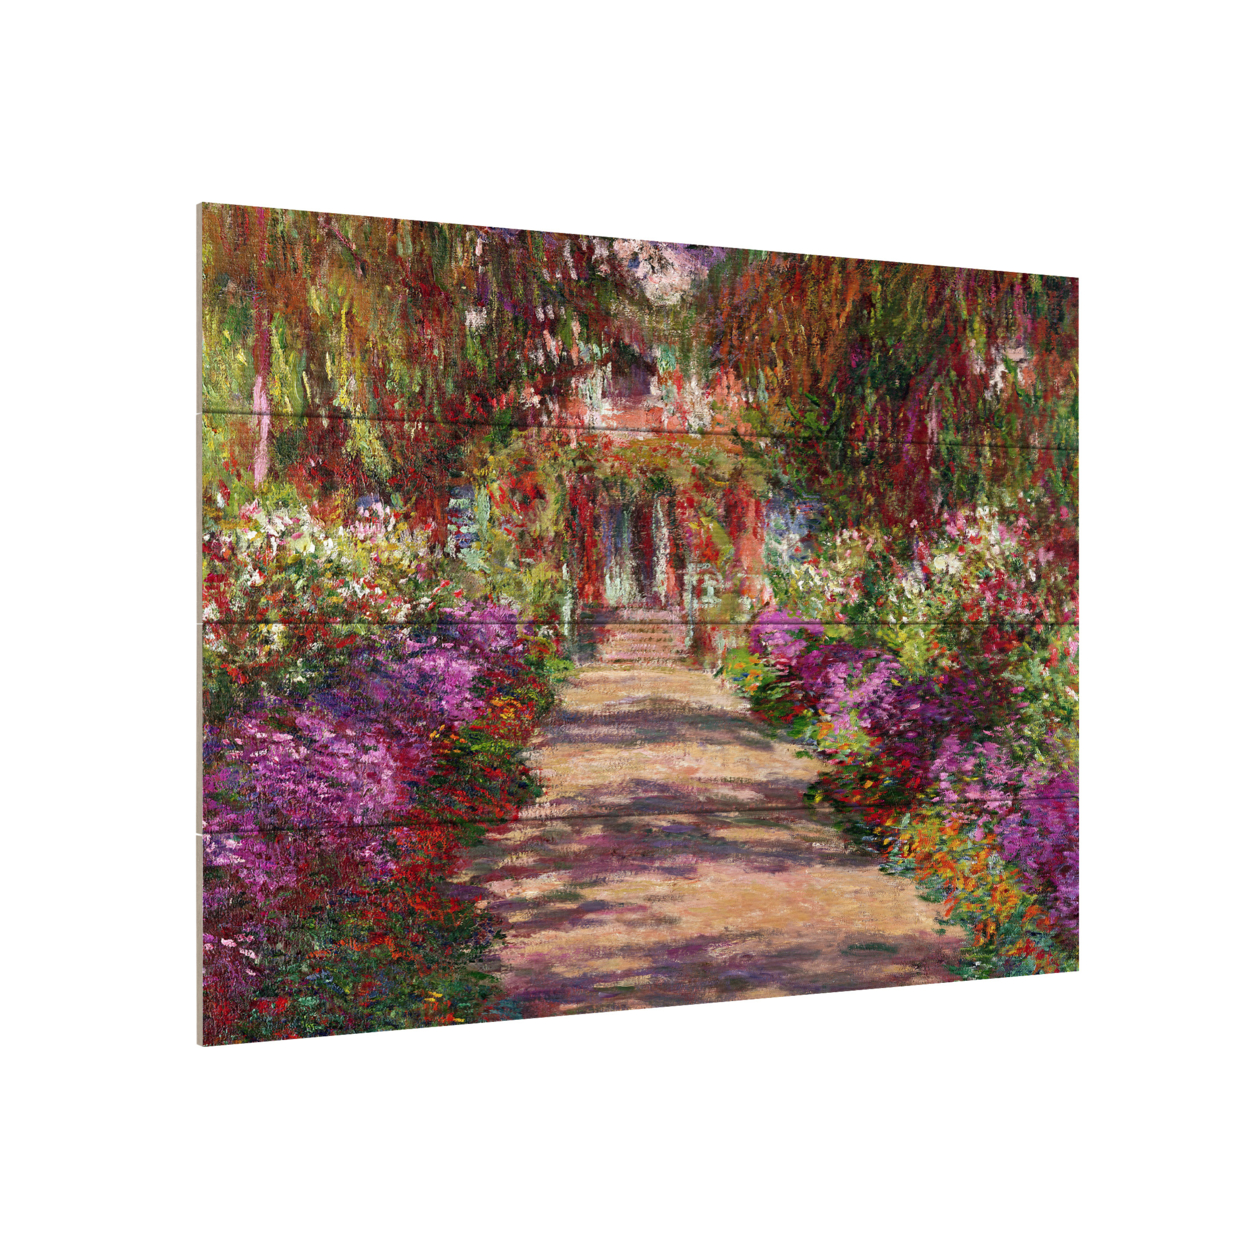 Wall Art 12 X 16 Inches Titled A Pathway In Monets Garden Ready To Hang Printed On Wooden Planks